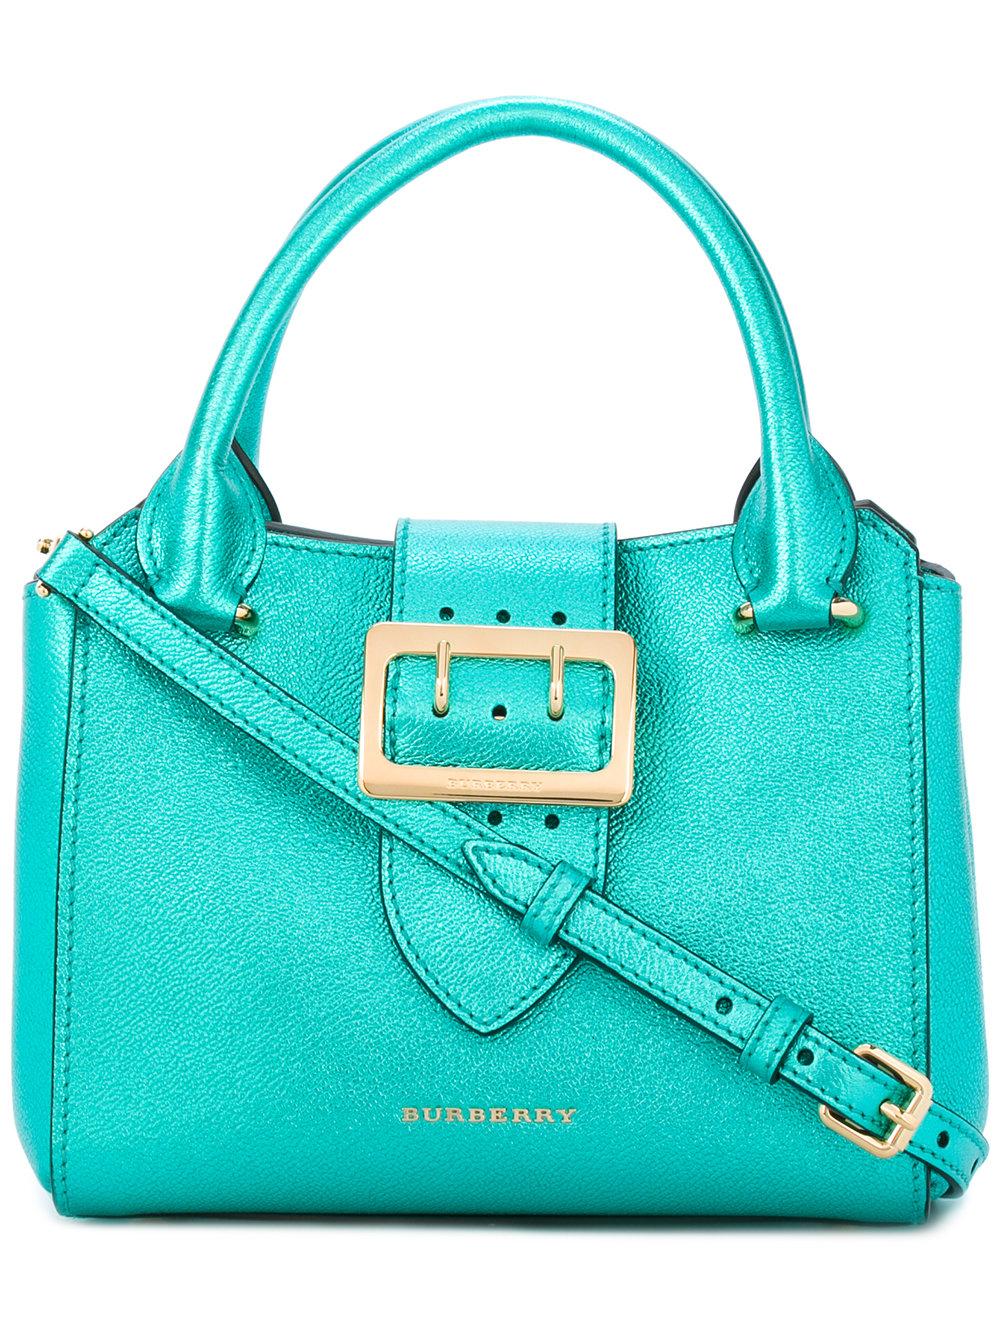 Lyst - Burberry Big Buckle Tote Bag in Green